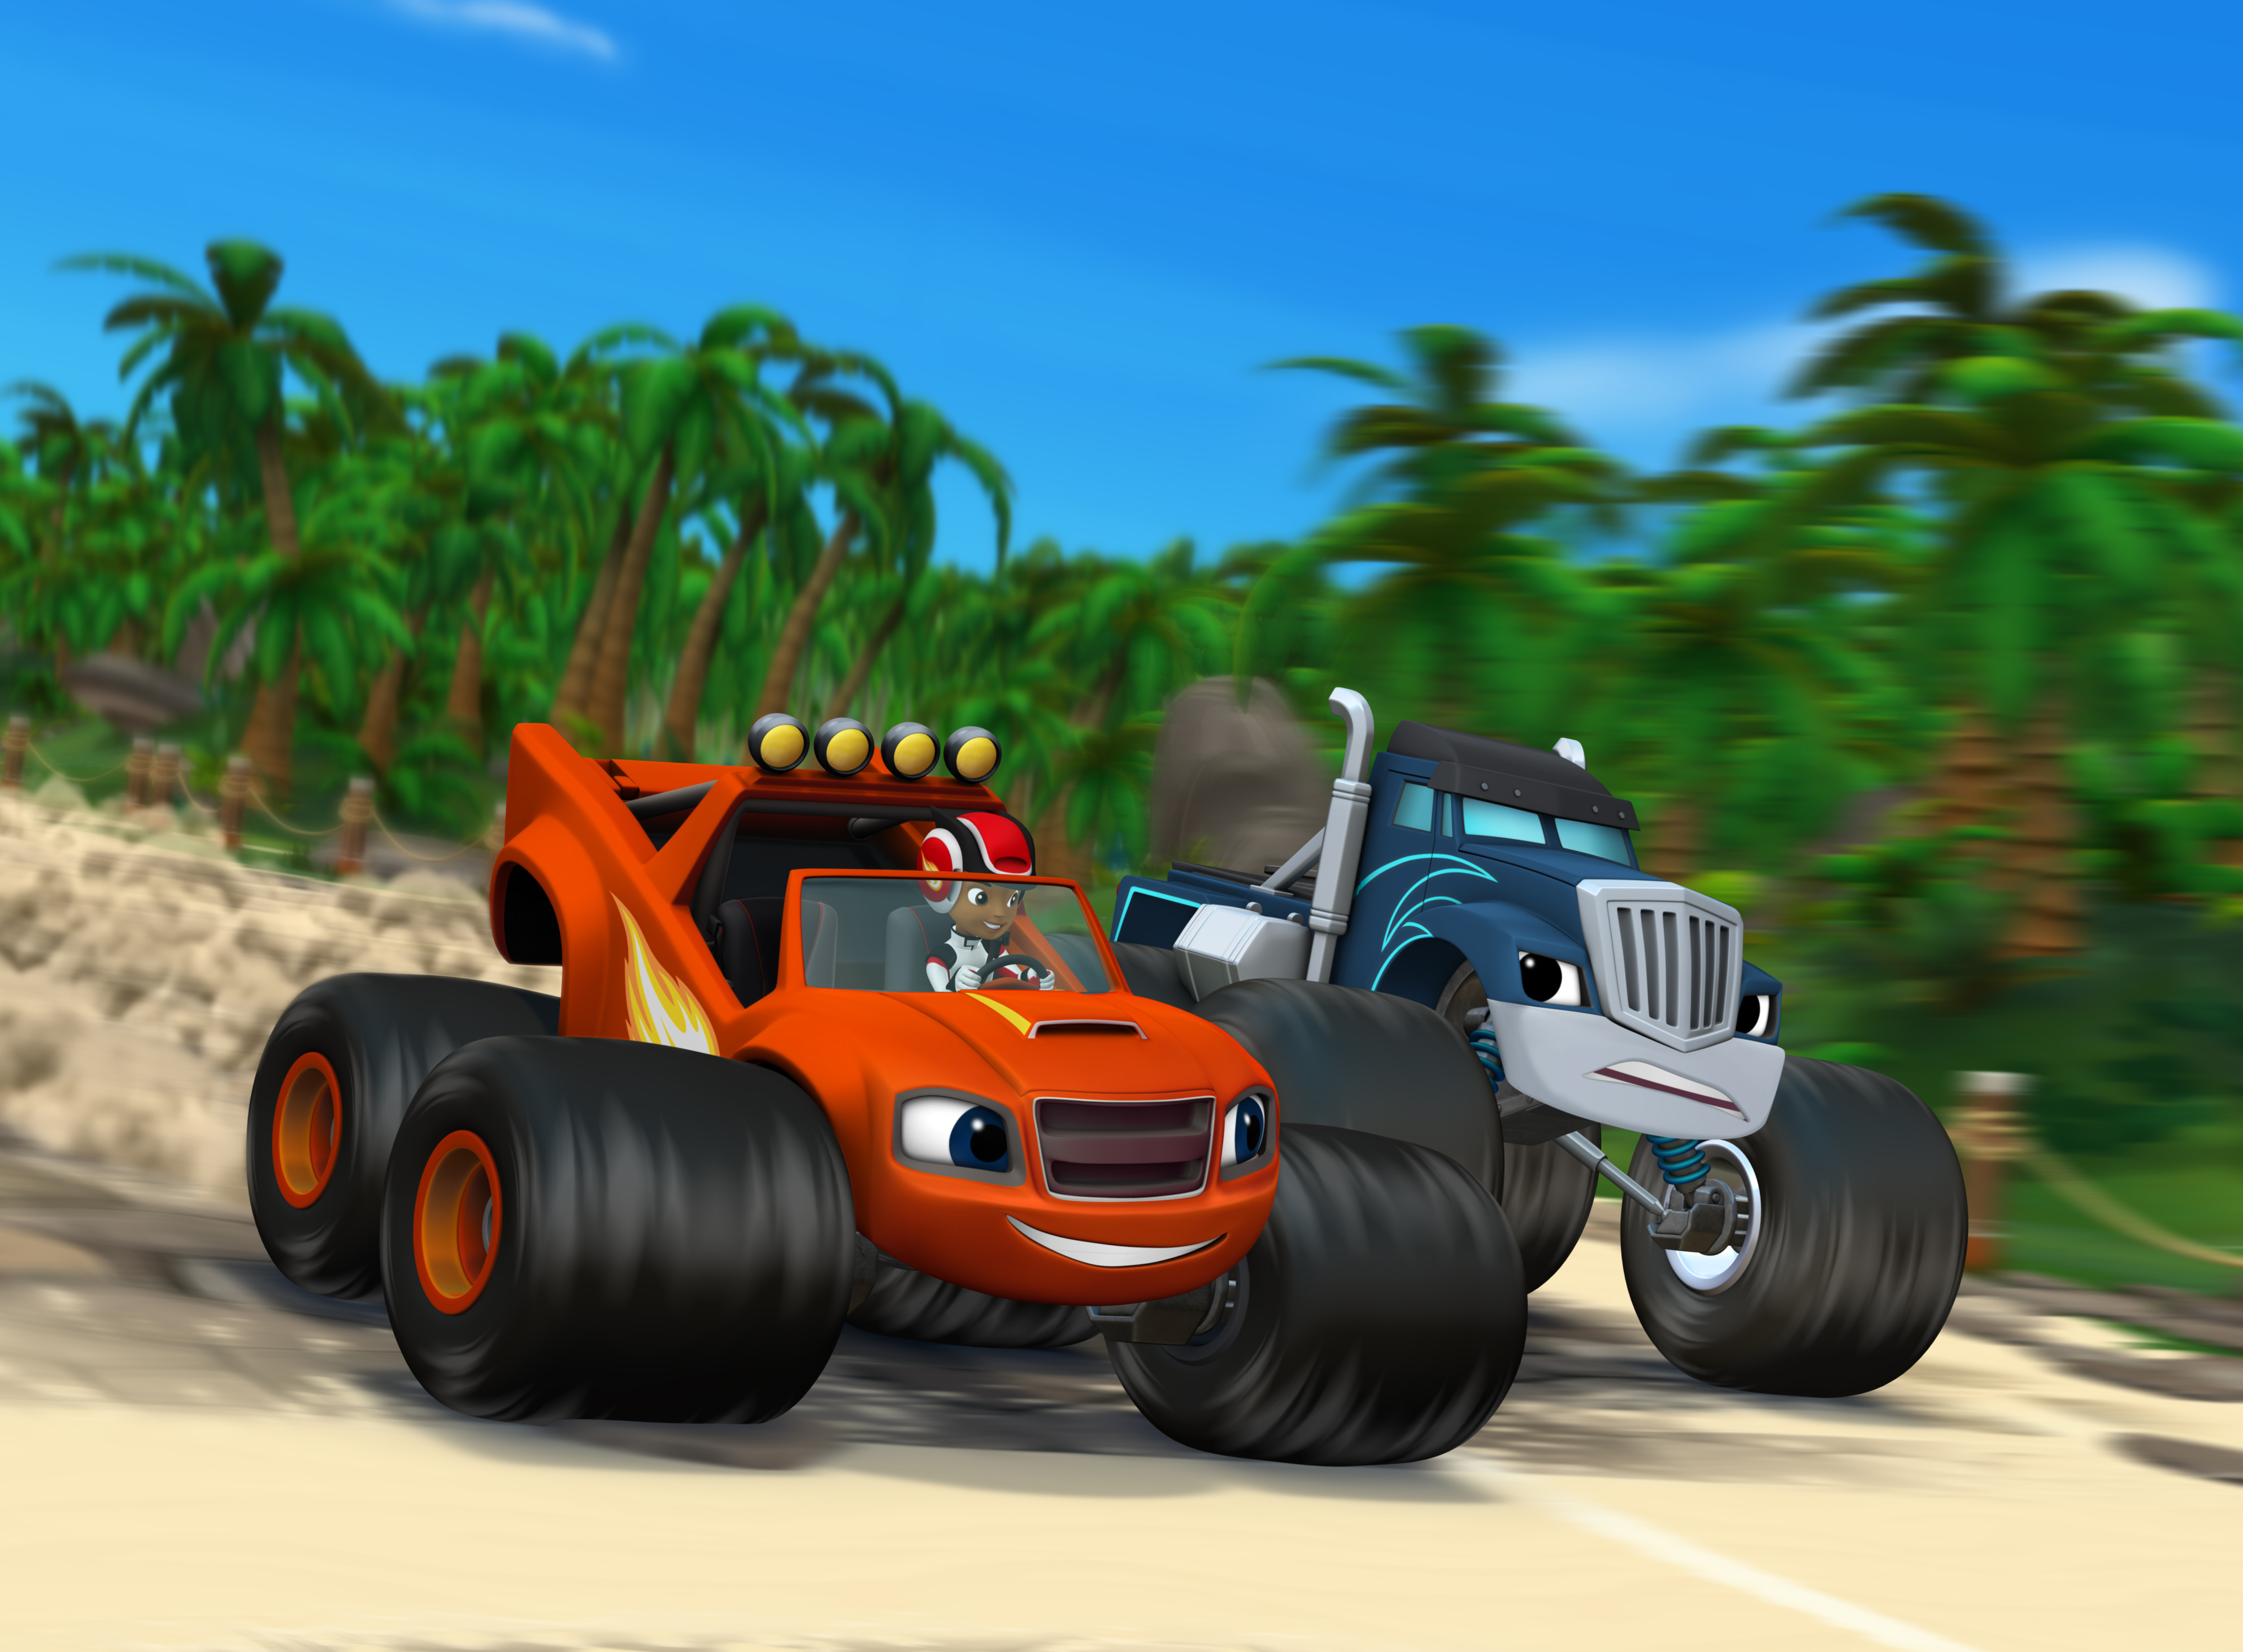 Nickelodeon Rolls out New Blaze and the Monster Machines Content across TV,  Digital and More for Month of May